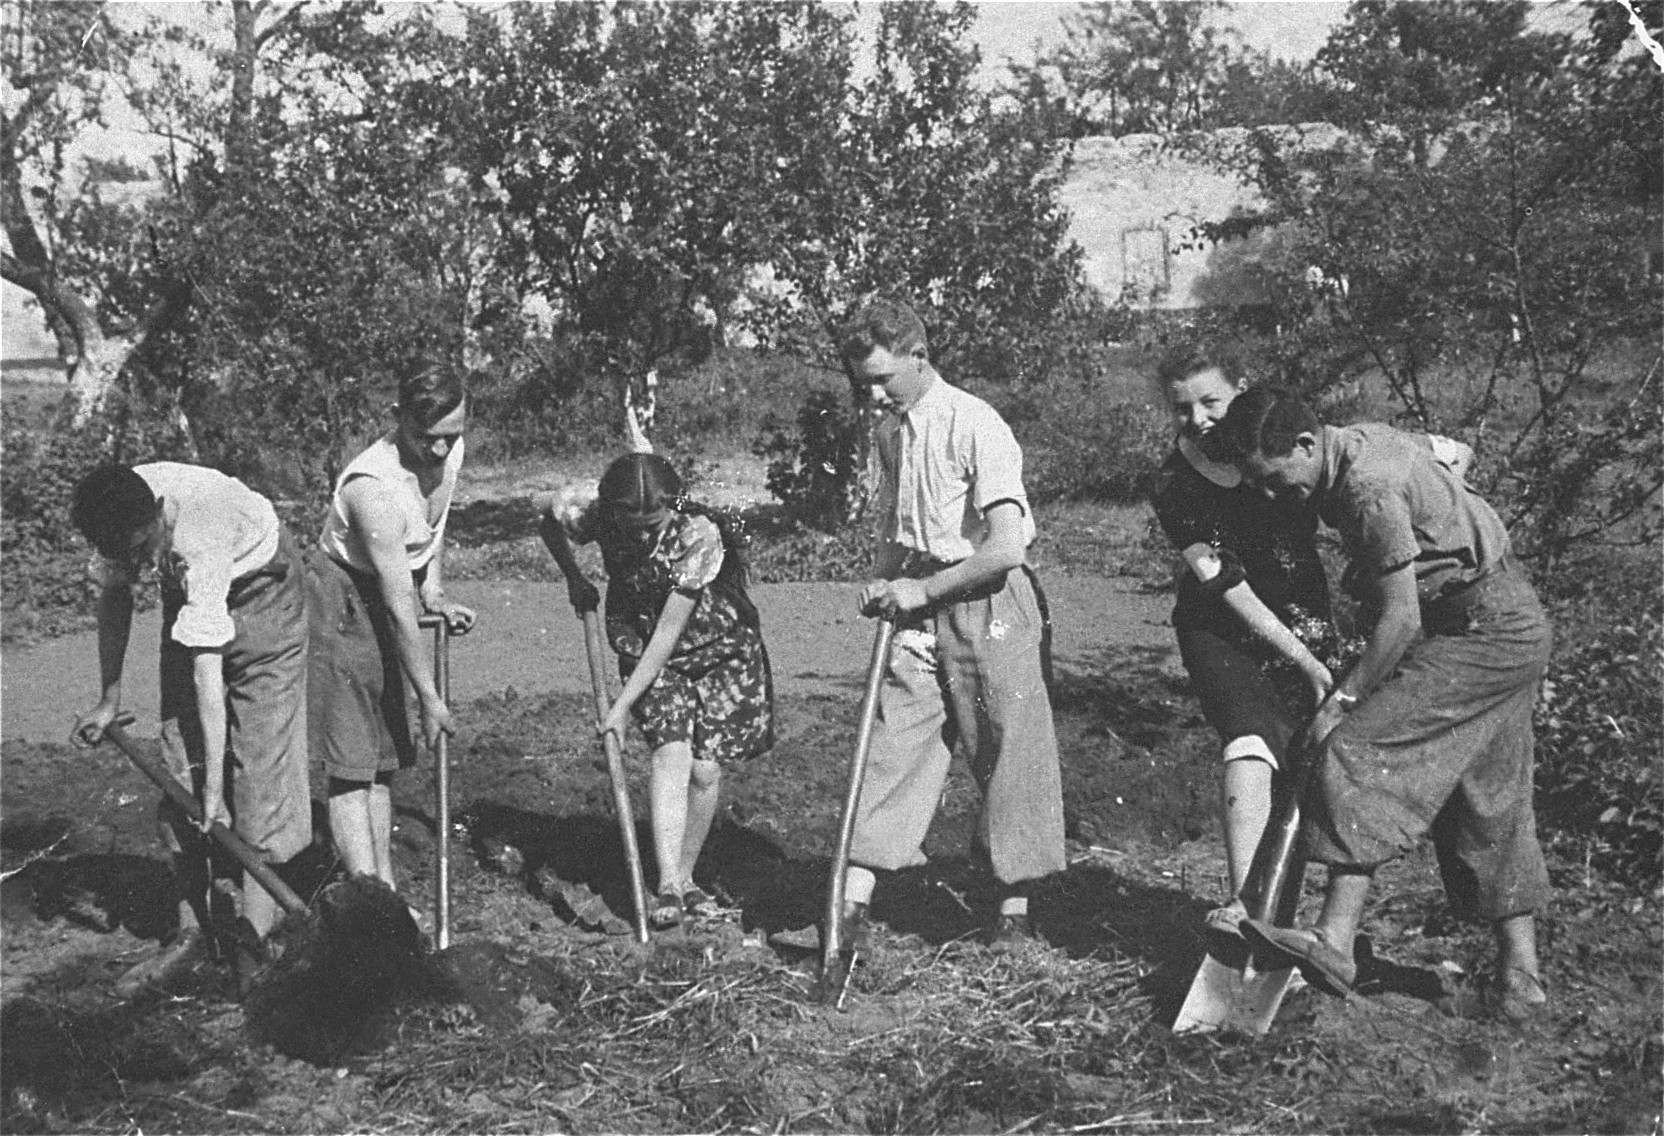 Members of the Hashomer Hatzair Zionist collective prepare the ground for planting on the farm in Zarki.

Among those pictured are: Heniek Pejsak (second from the left); Mania Kalpkop (third from the left); Lejzor Zborowski (third from the right); and Berek Lemel (first on the right).